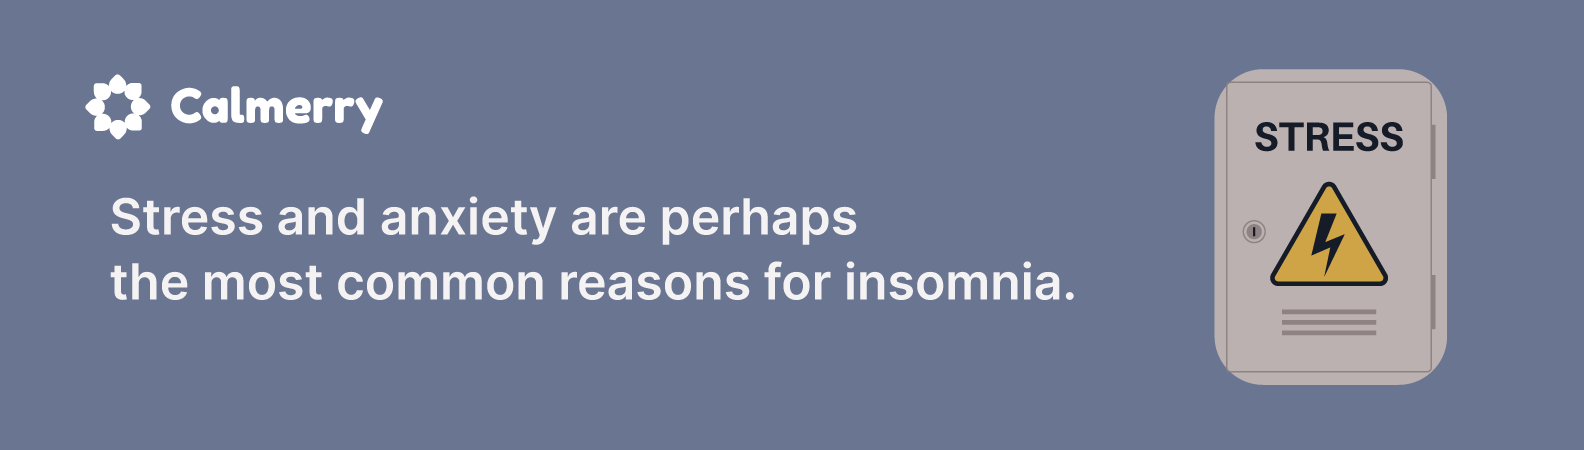 Stress and anxiety are perhaps the most common reasons for insomnia